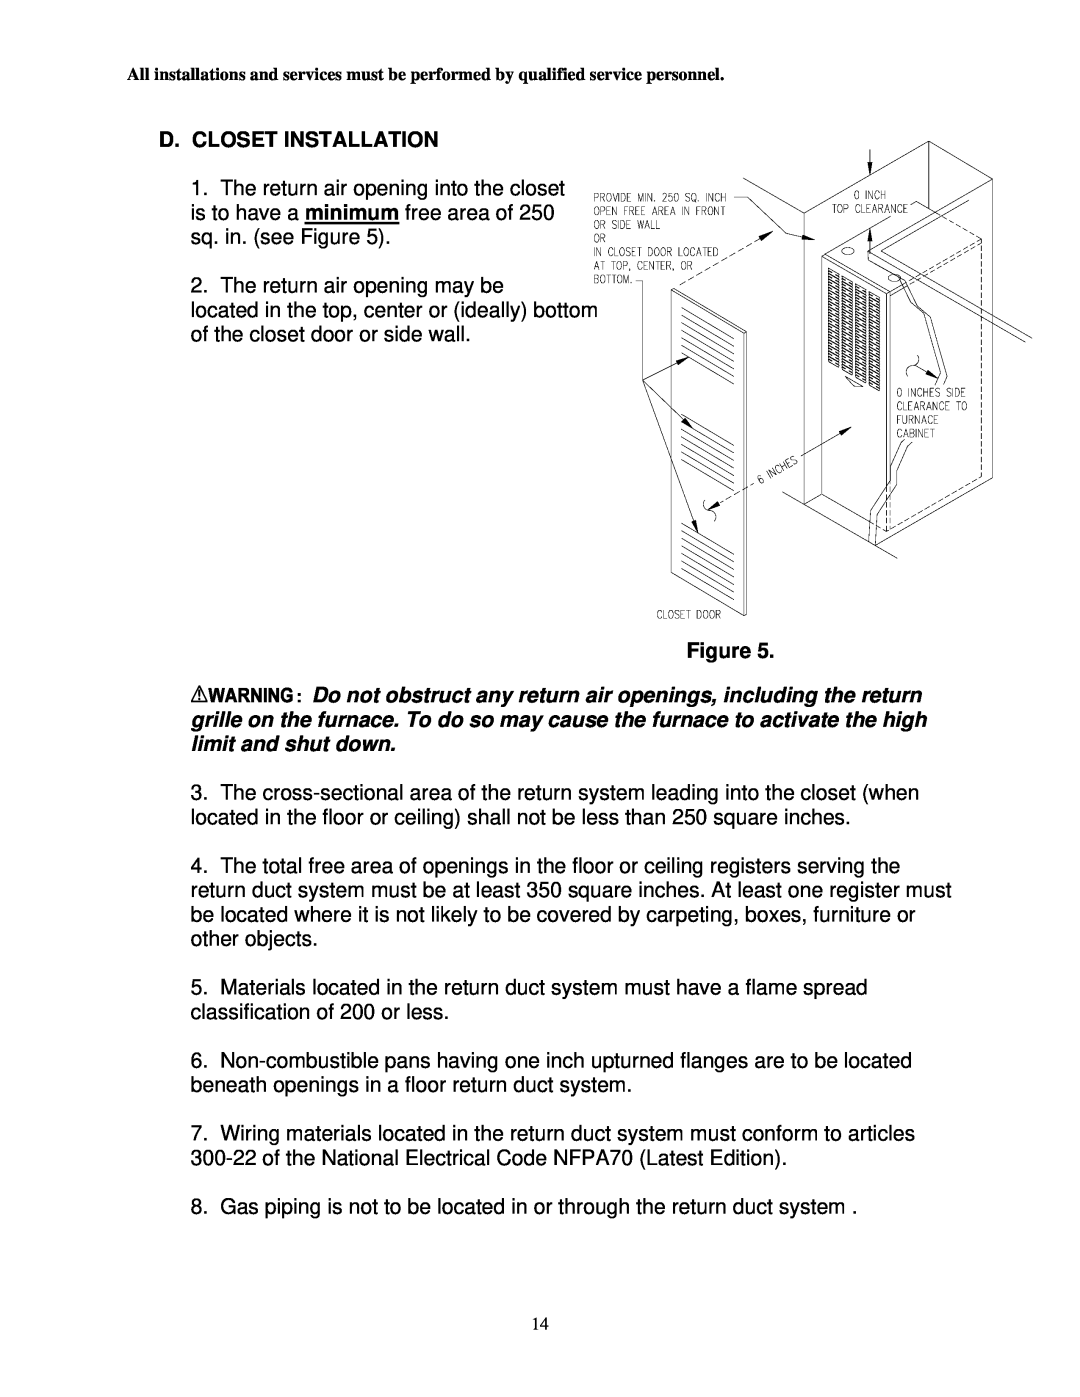 Thermo Products CMA2-75N, CMA1-50N service manual D. Closet Installation, Figure 